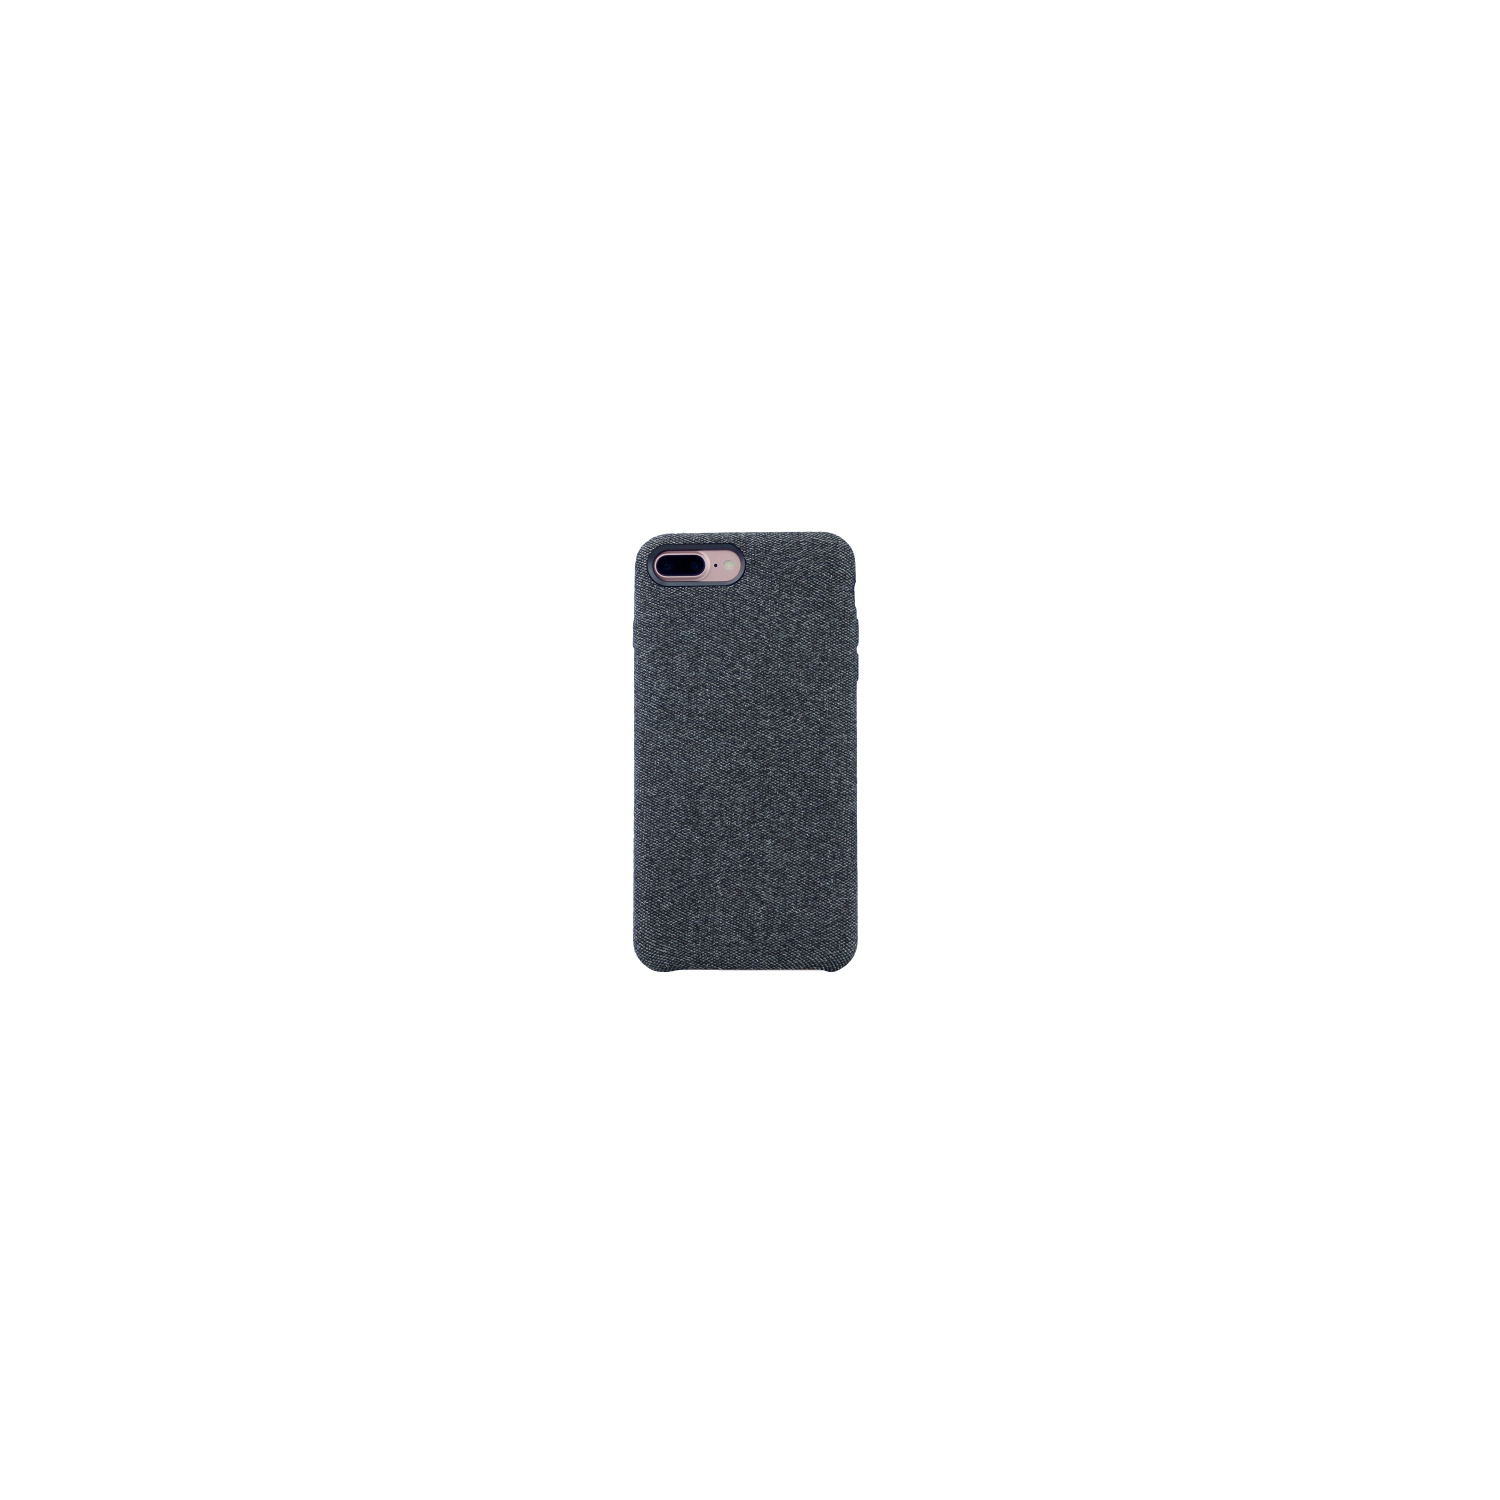 Fabric Protective Case For Iphone 5/s/SE(2016), Black